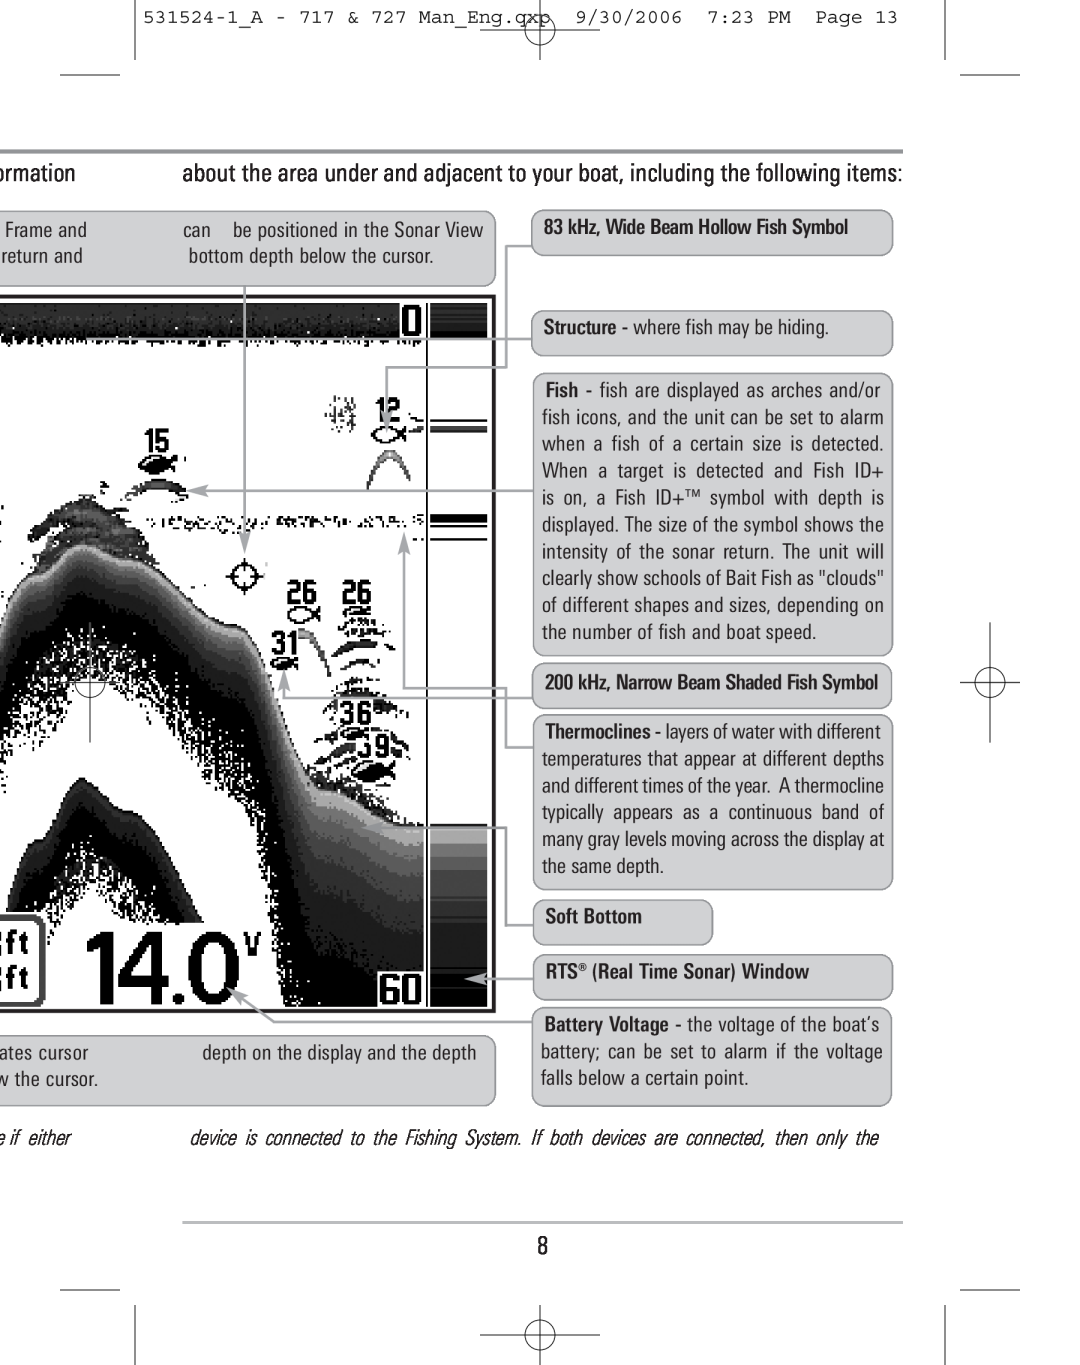 Humminbird manual ormation, 531524-1A - 717 & 727 ManEng.qxp 9/30/2006 723 PM Page, 83 kHz, Wide Beam Hollow Fish Symbol 